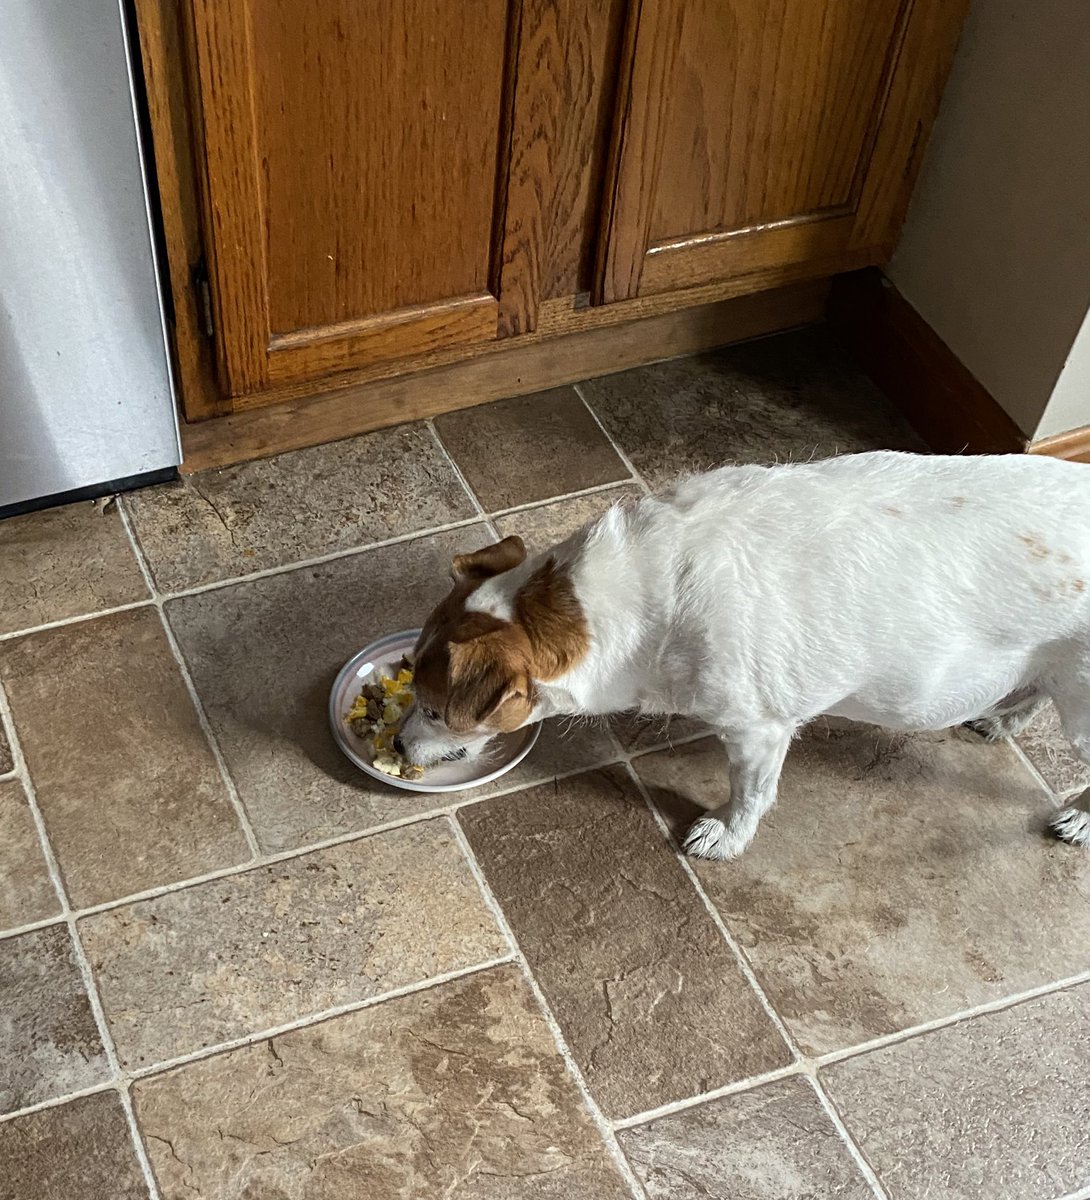 Happy #SundayFunday! I still have my cone I just get breaks whenever pawsible. Yesterday was a wuvely day. Was outside all day. Cloudy but warm today and got sausage and eggy 2nd breaky. 💖🐾 #secondbreakfast #sundayvibes #jackrusselllife #dogsofX